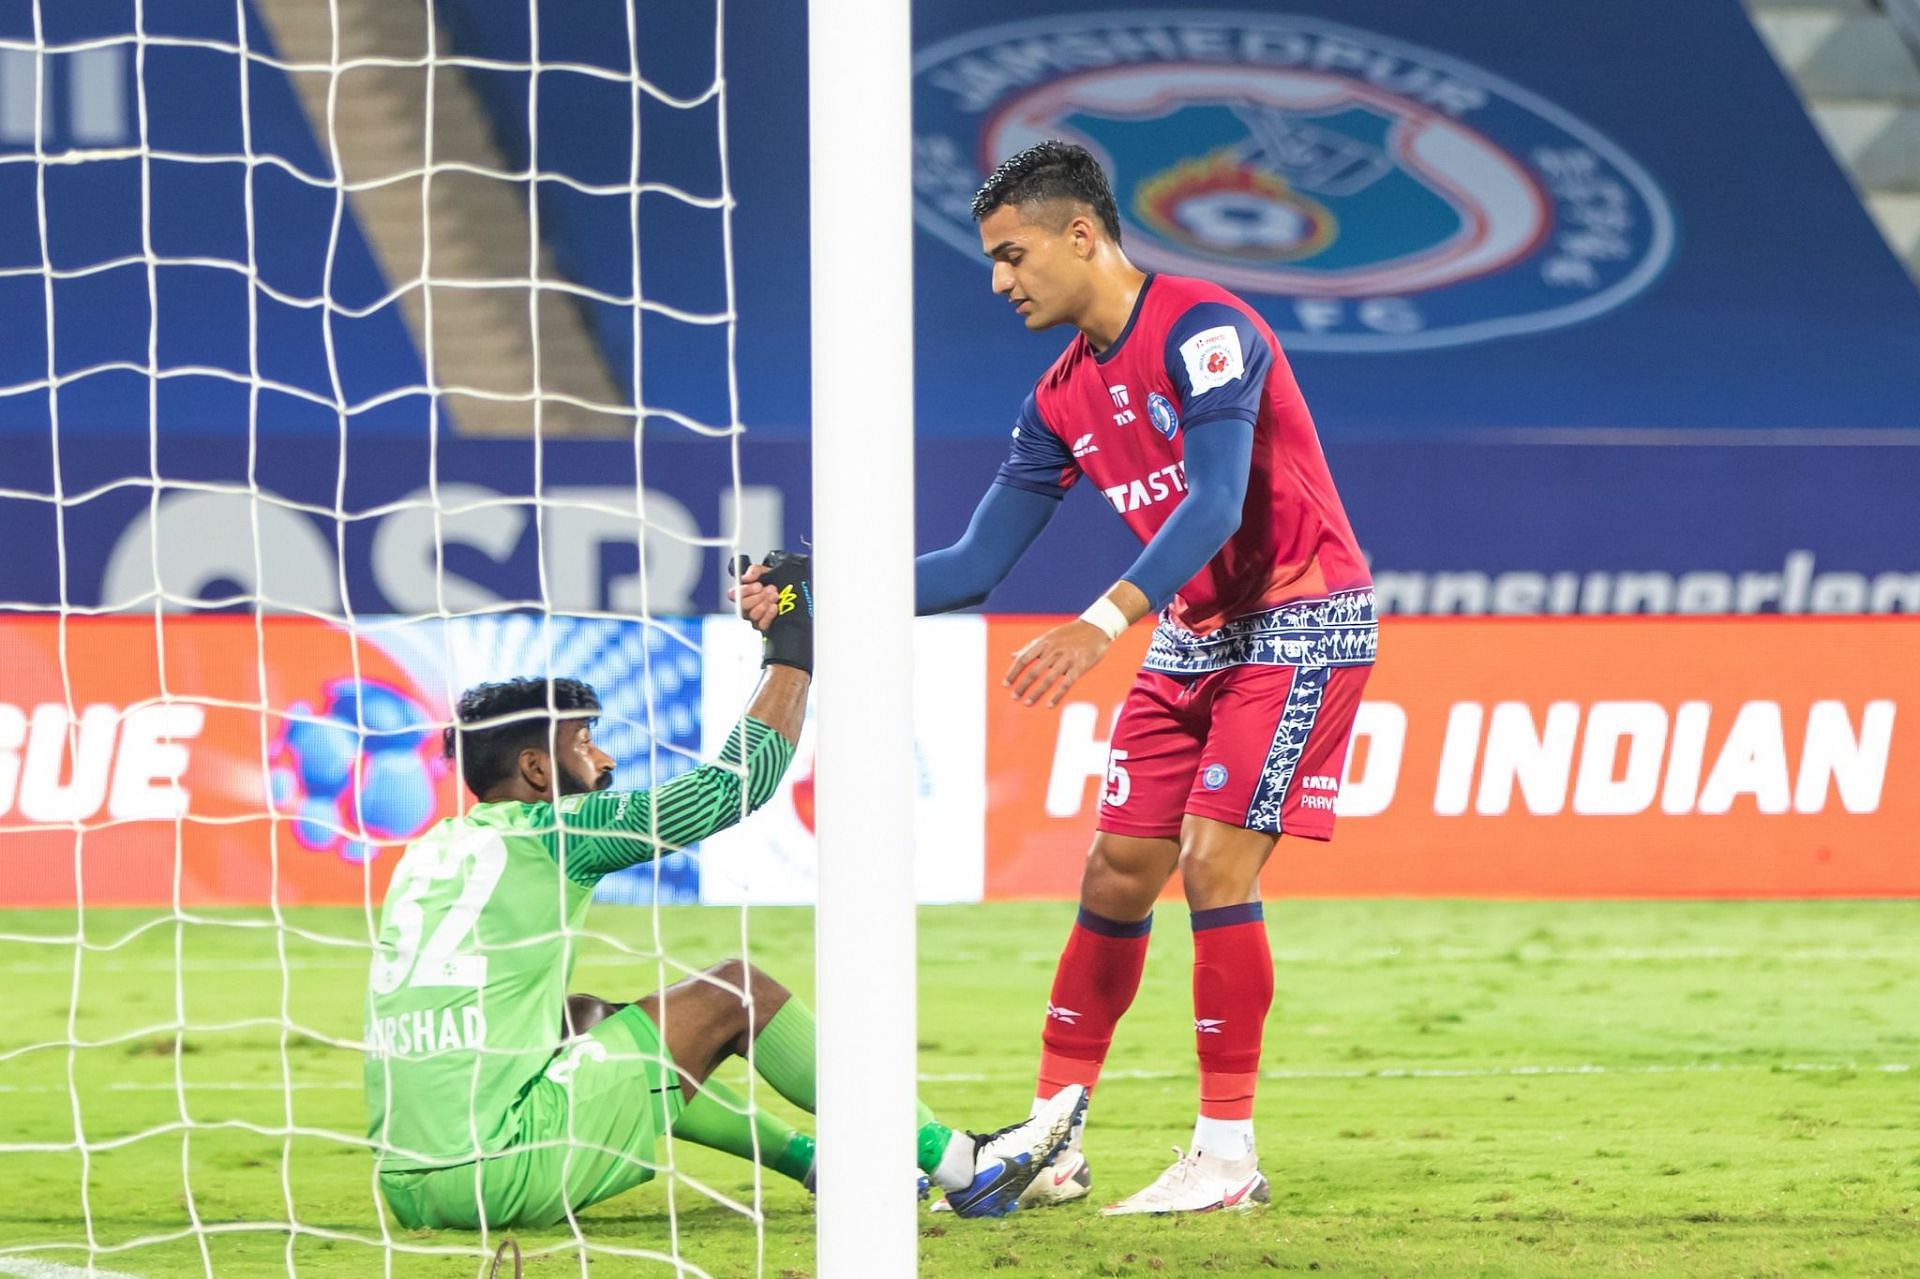 The goal that Ishan Pandita scored could have been ruled out (Image courtesy: ISL social media)